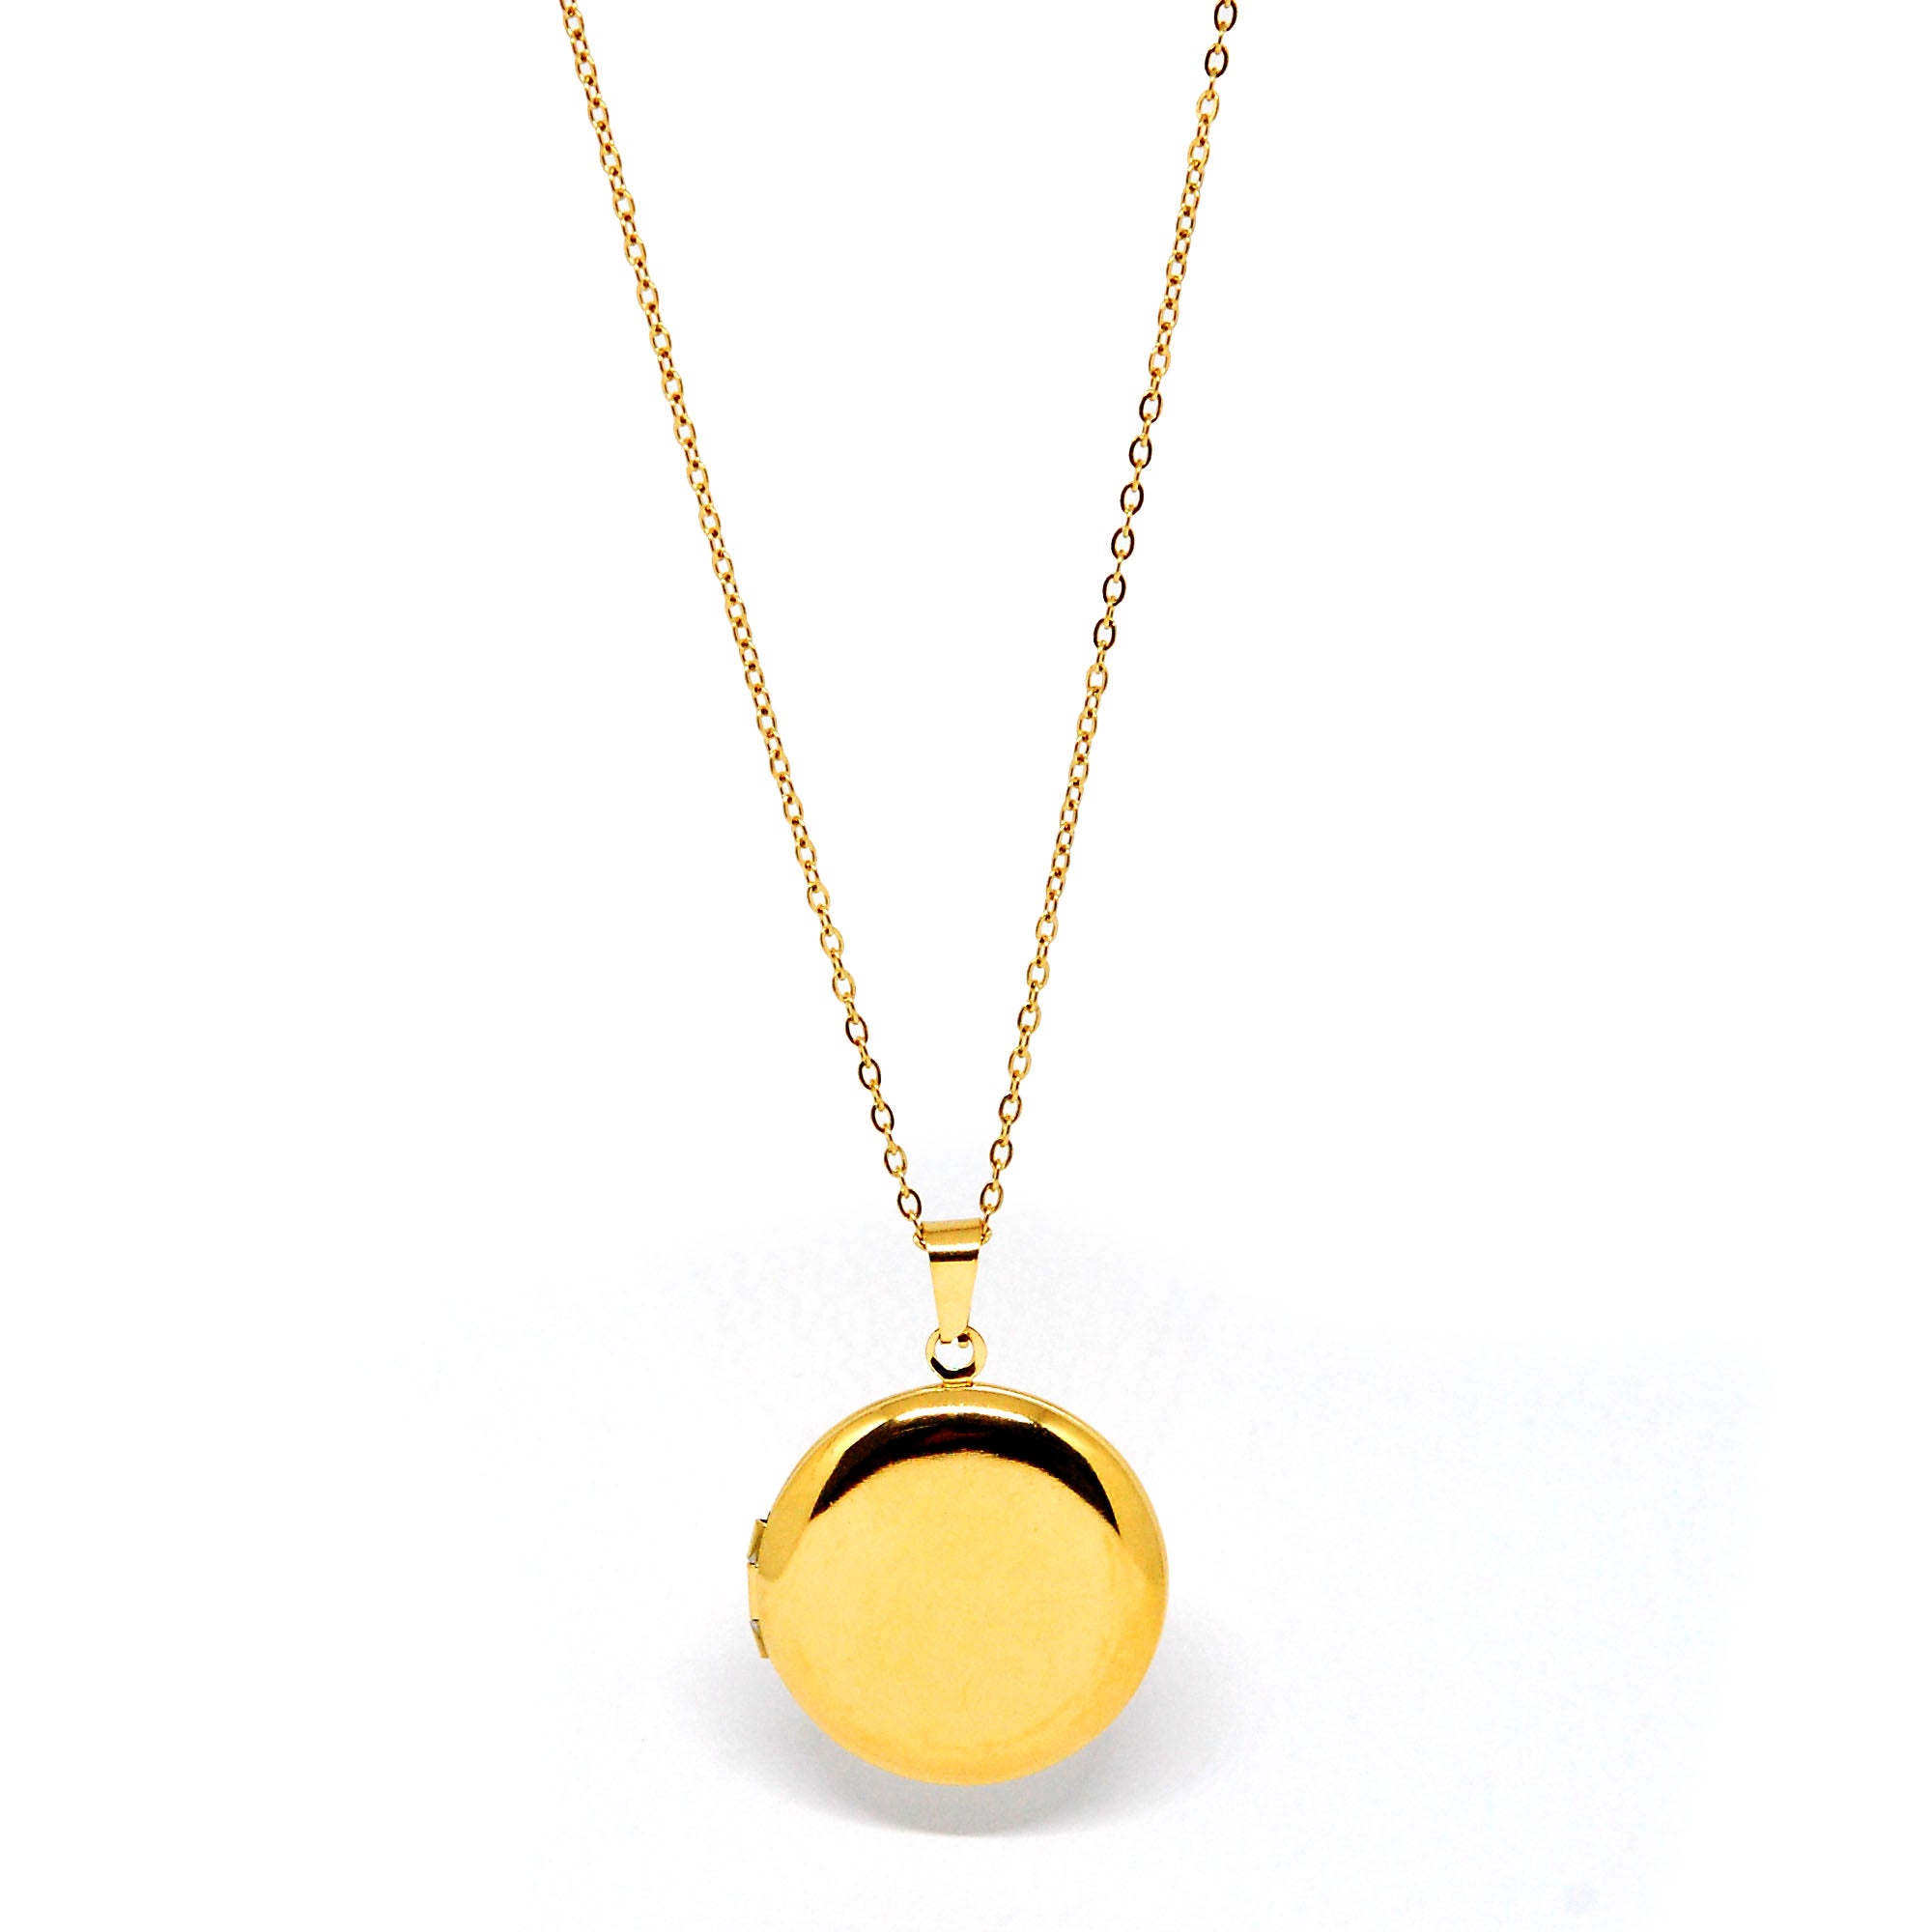 ESN 7373: Gold Plated 27mm Thin Circle Locket w/ 17" Med Link Chain (w/ Free Face Engrave)